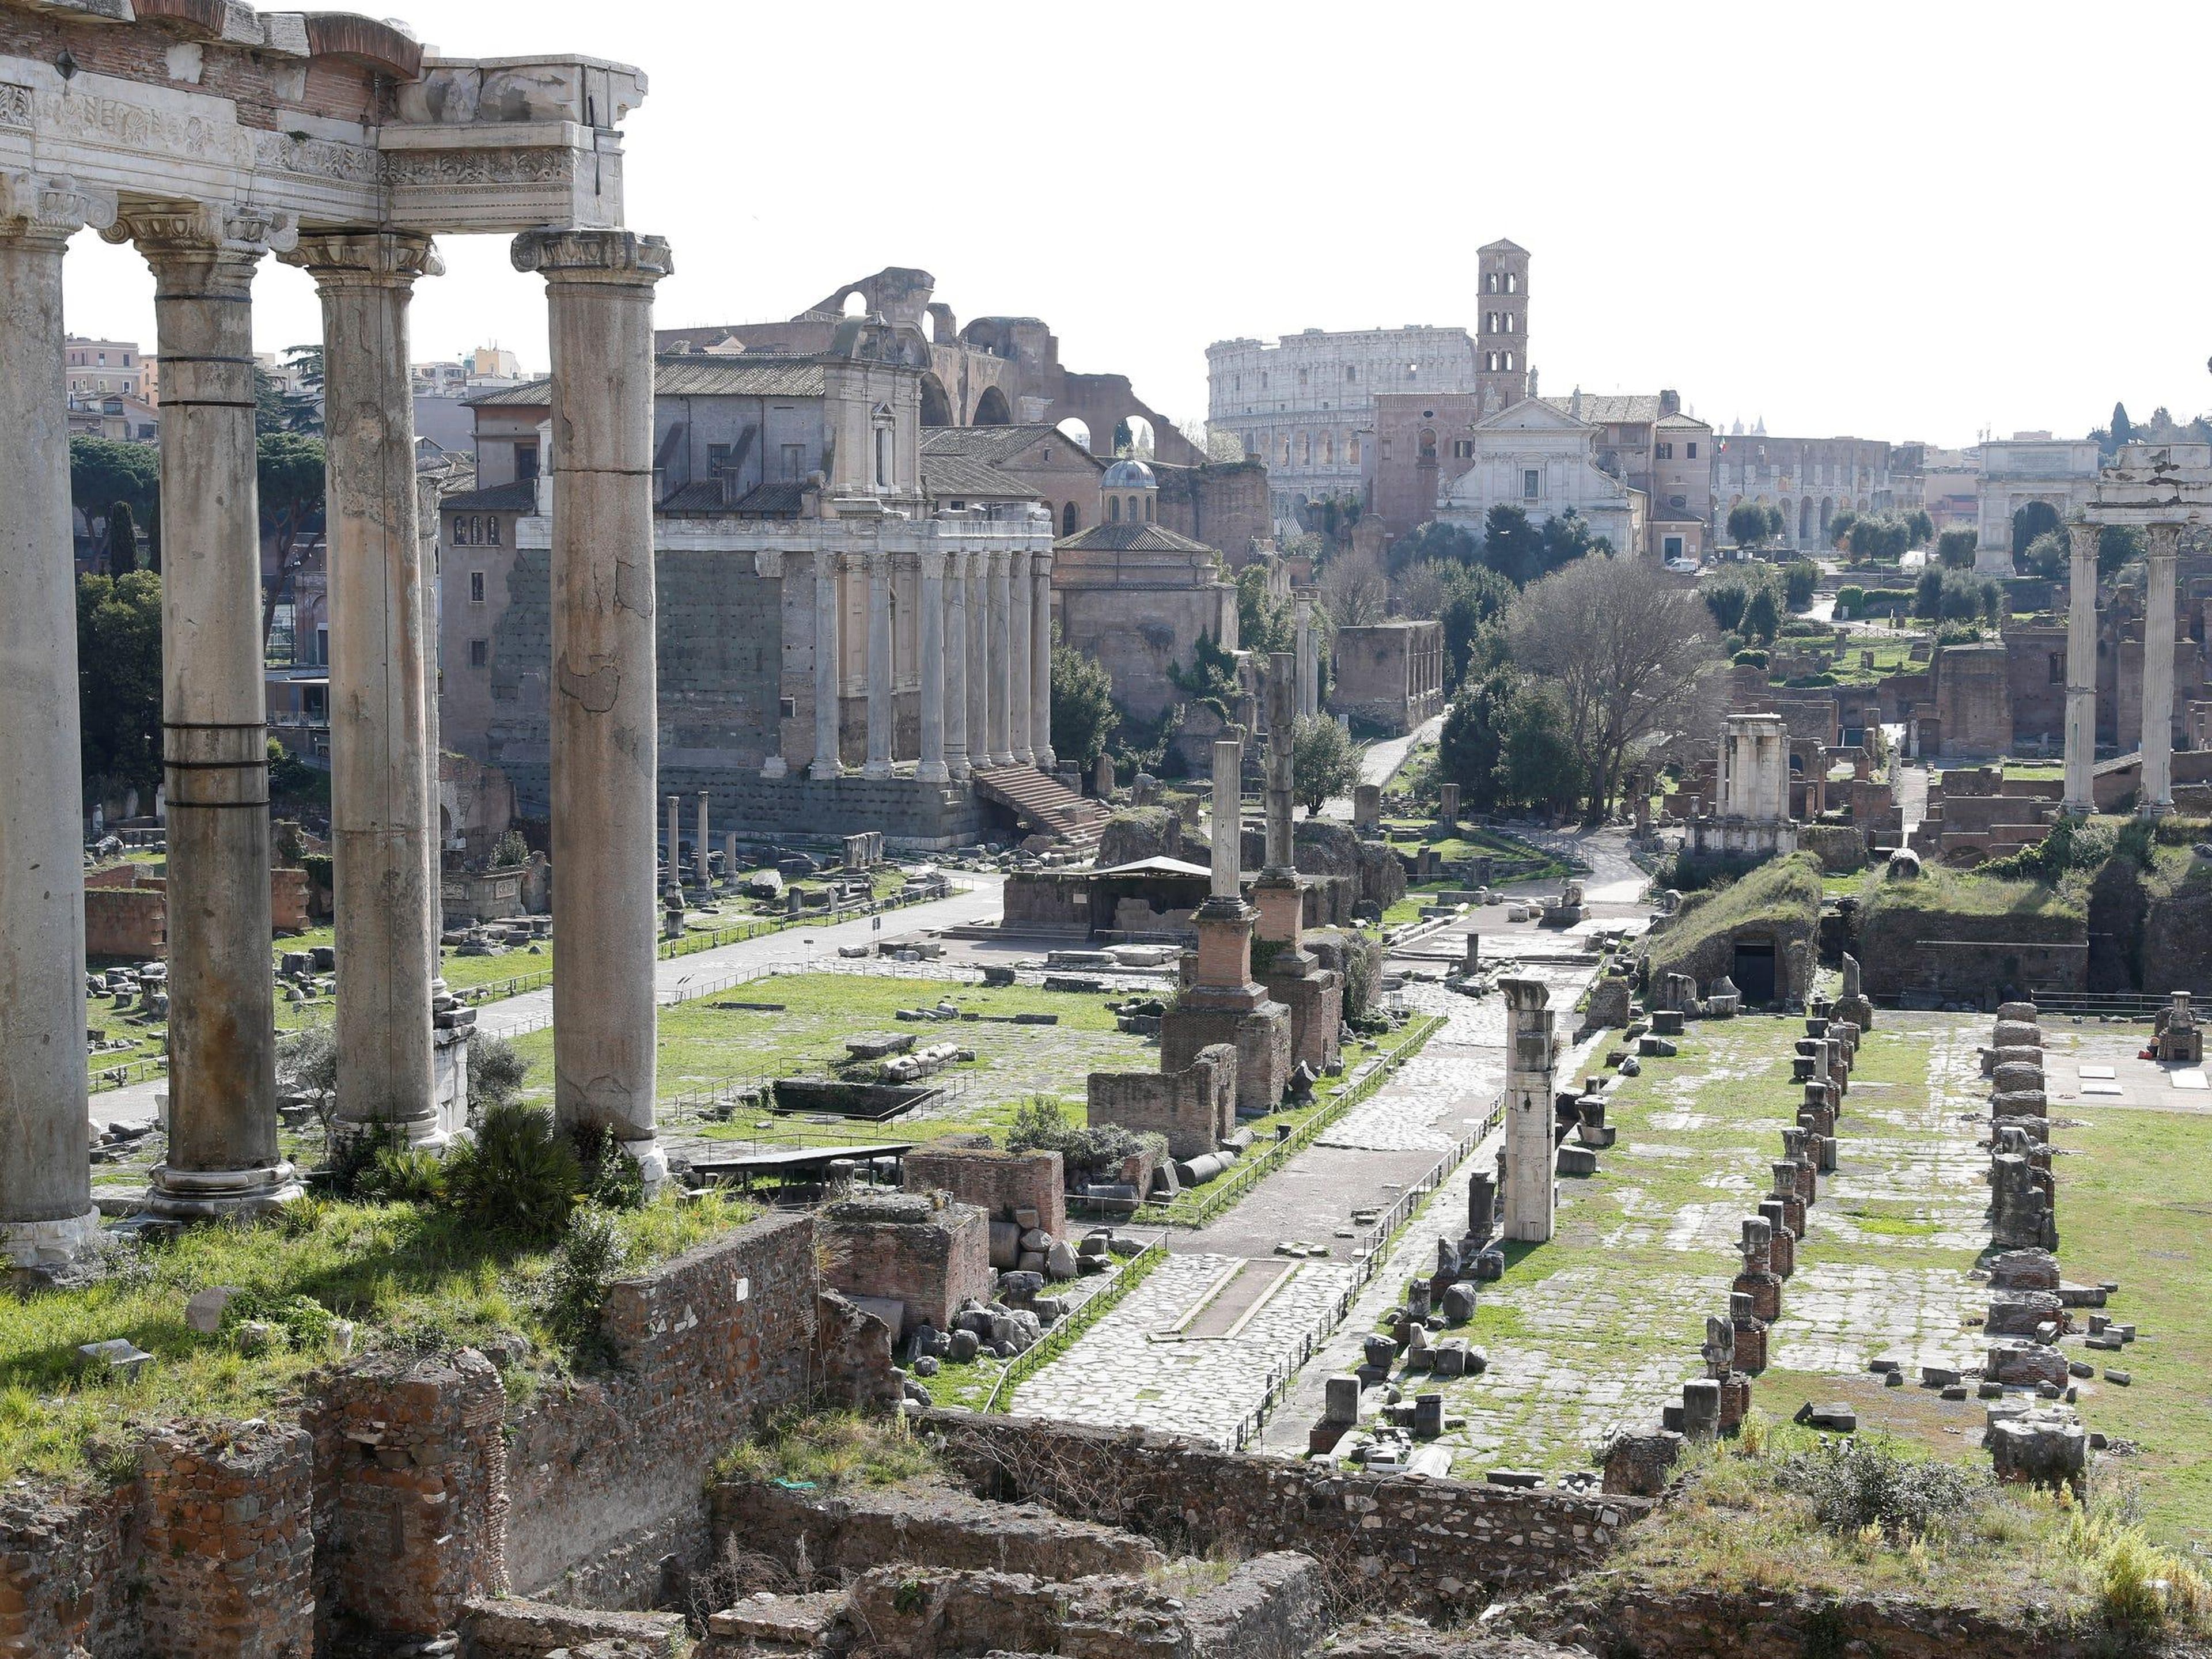 A view of the deserted Roman Forum on March 23, after Italy tightens measures to contain the spread of the coronavirus.